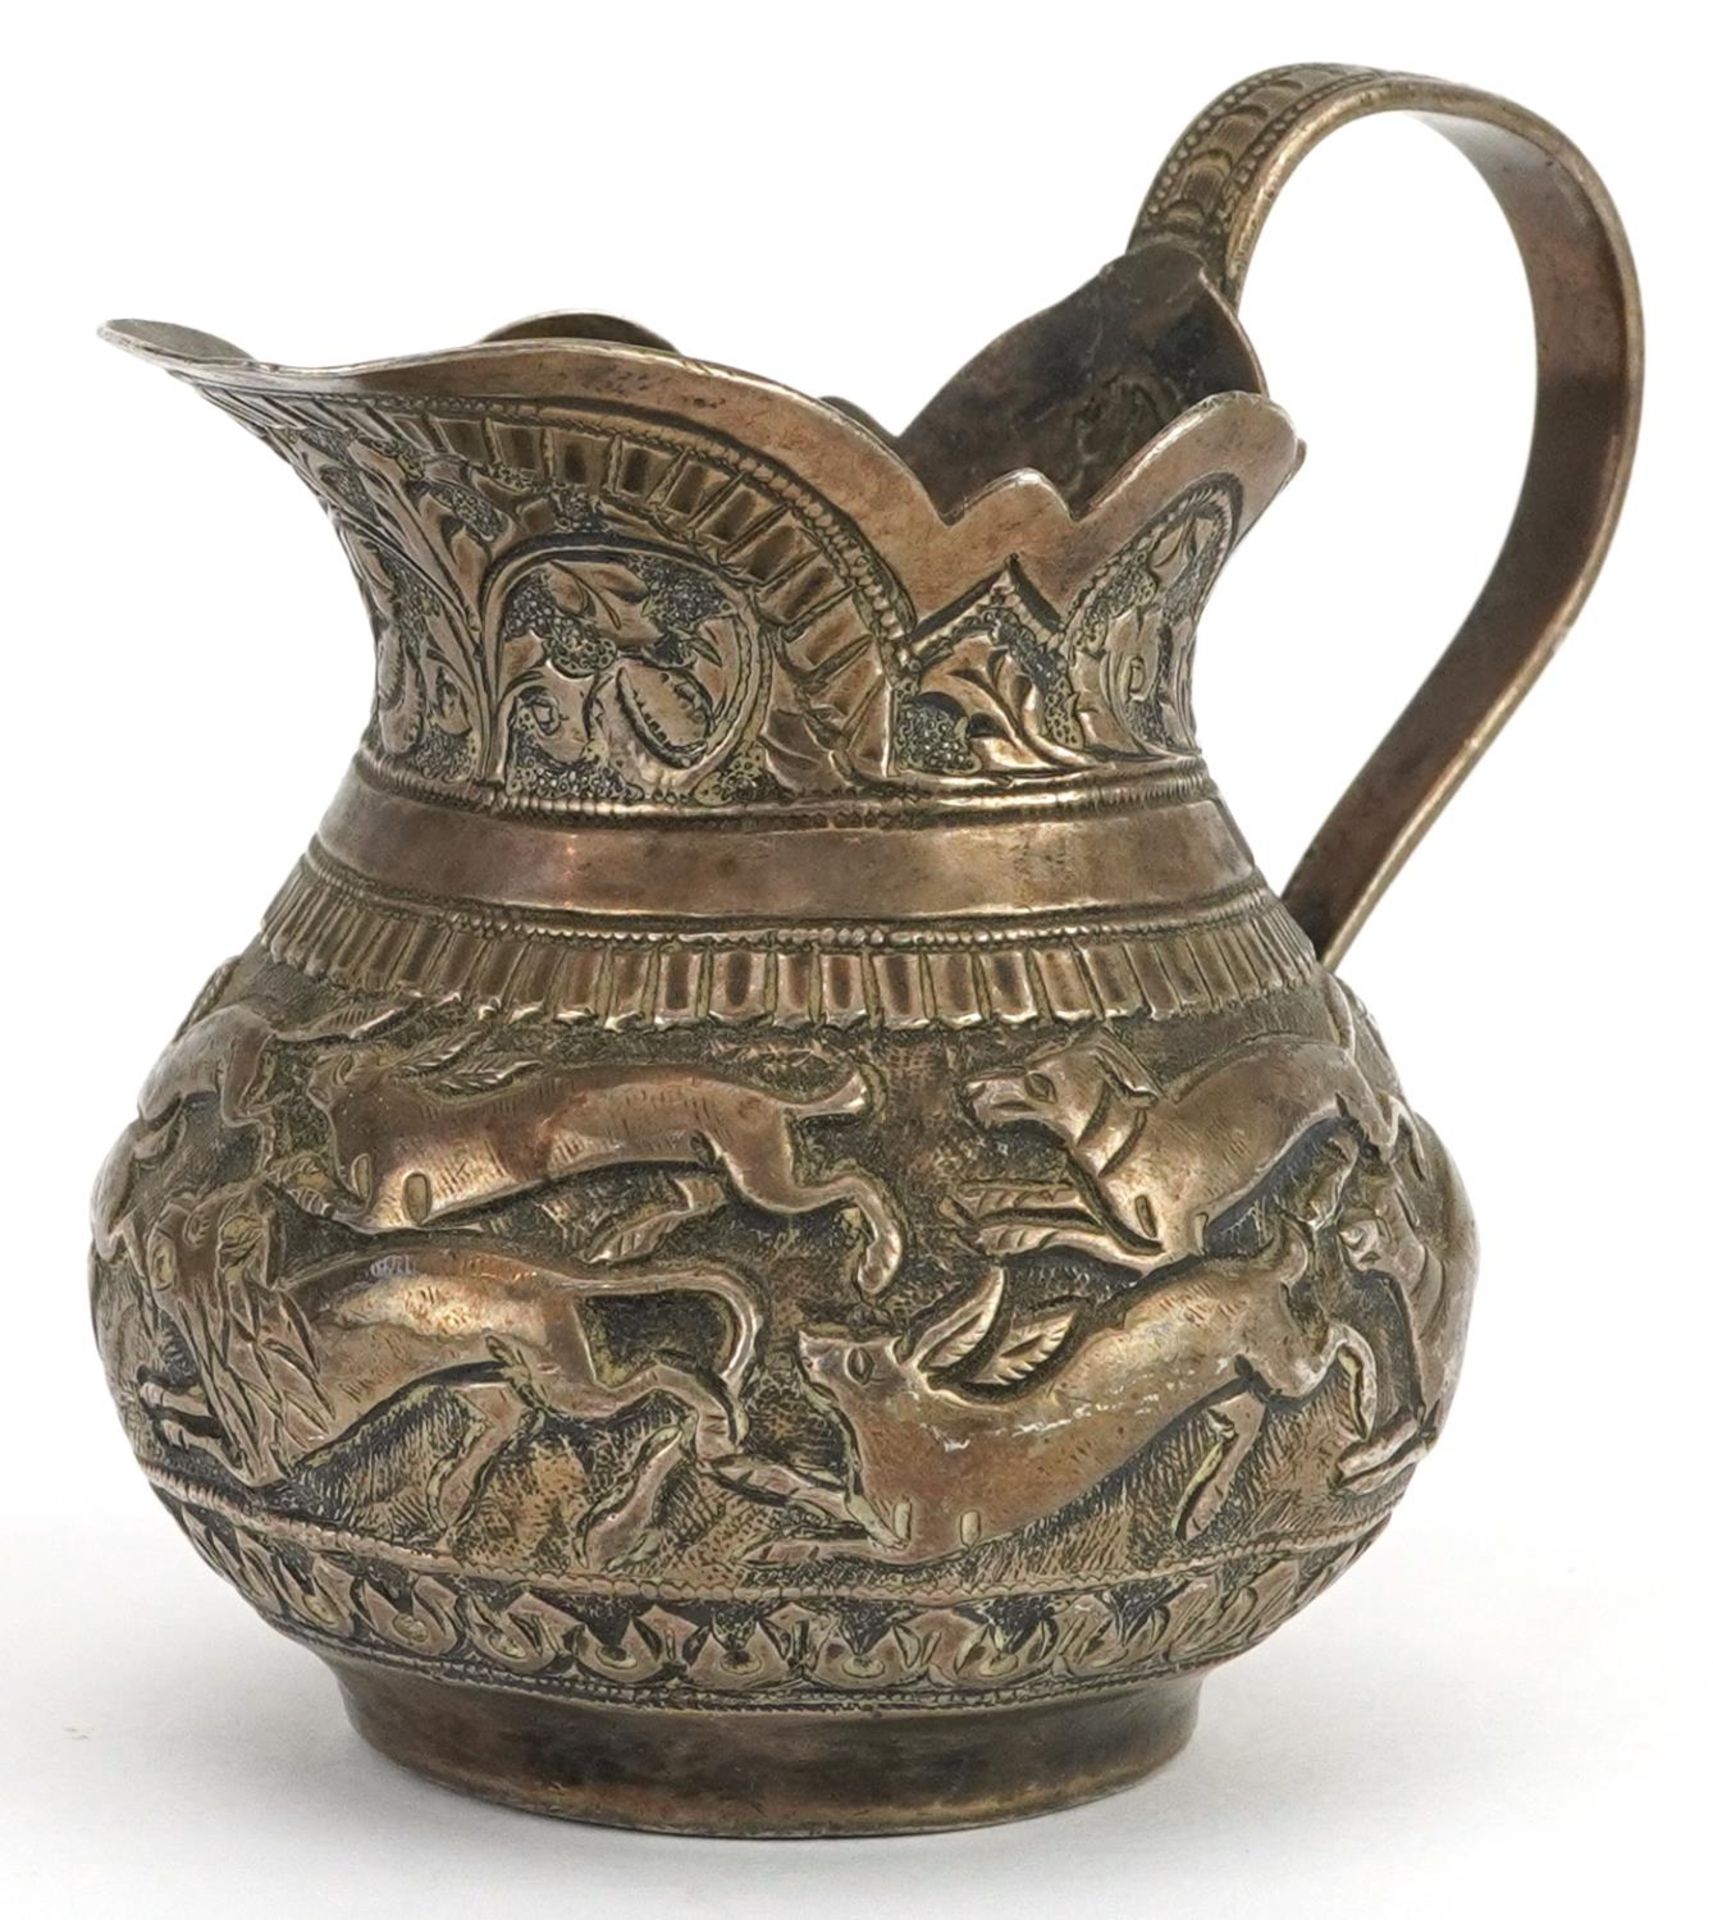 Anglo Indian unmarked silver cream jug embossed with wild animals, 7cm high, 101.8g : For further